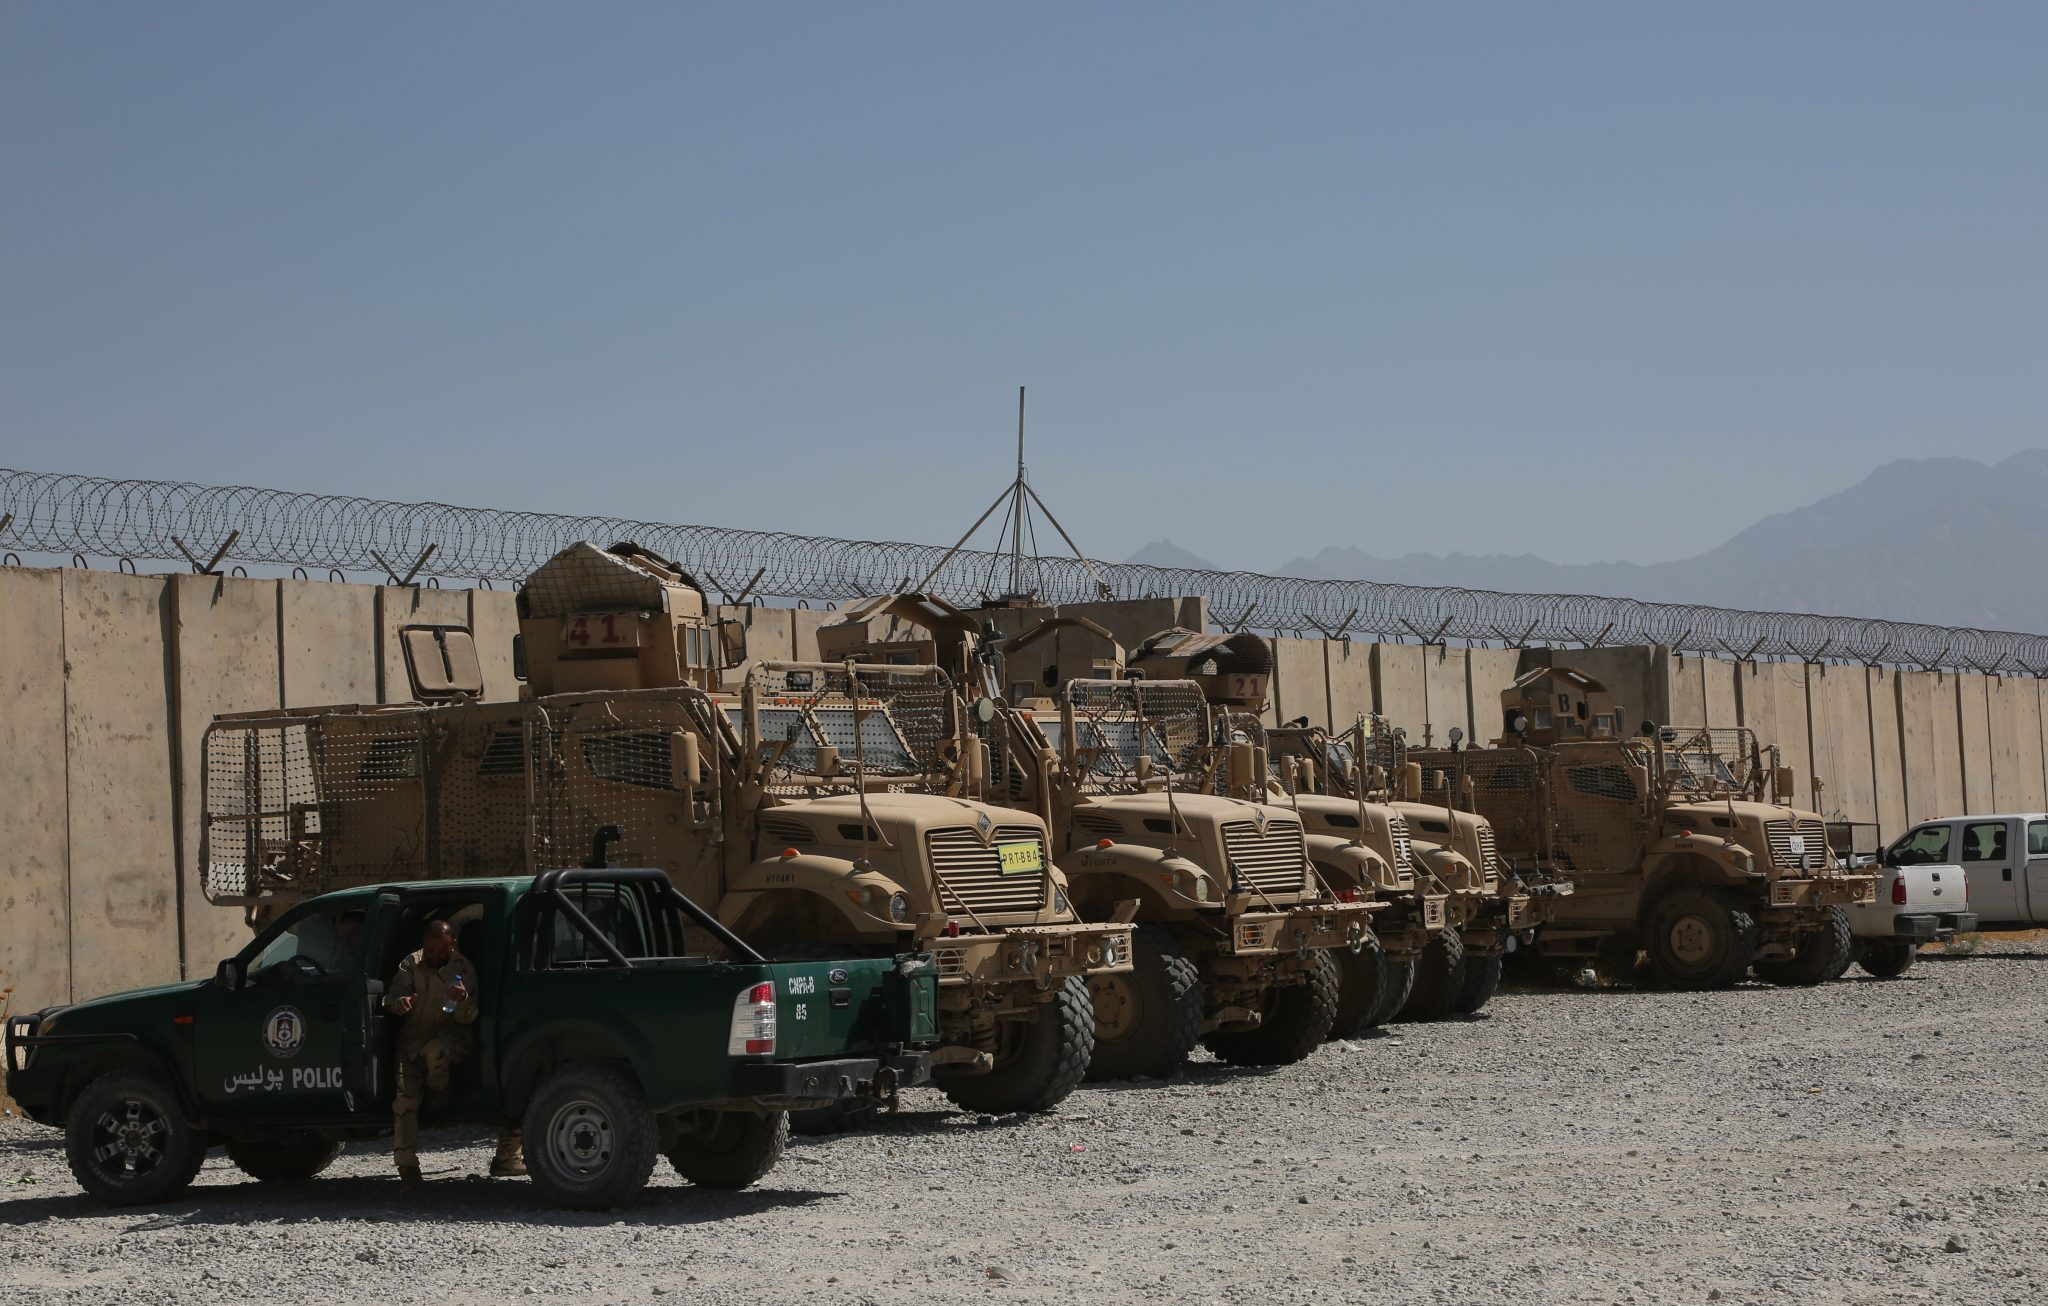 Military vehicles abandoned by US forces at the Bagram Airfield base after all U.S. and NATO forces evacuated, 09-0702021. Image: Rahmatullah ALizadah/Xinhua News Agency/PA Images